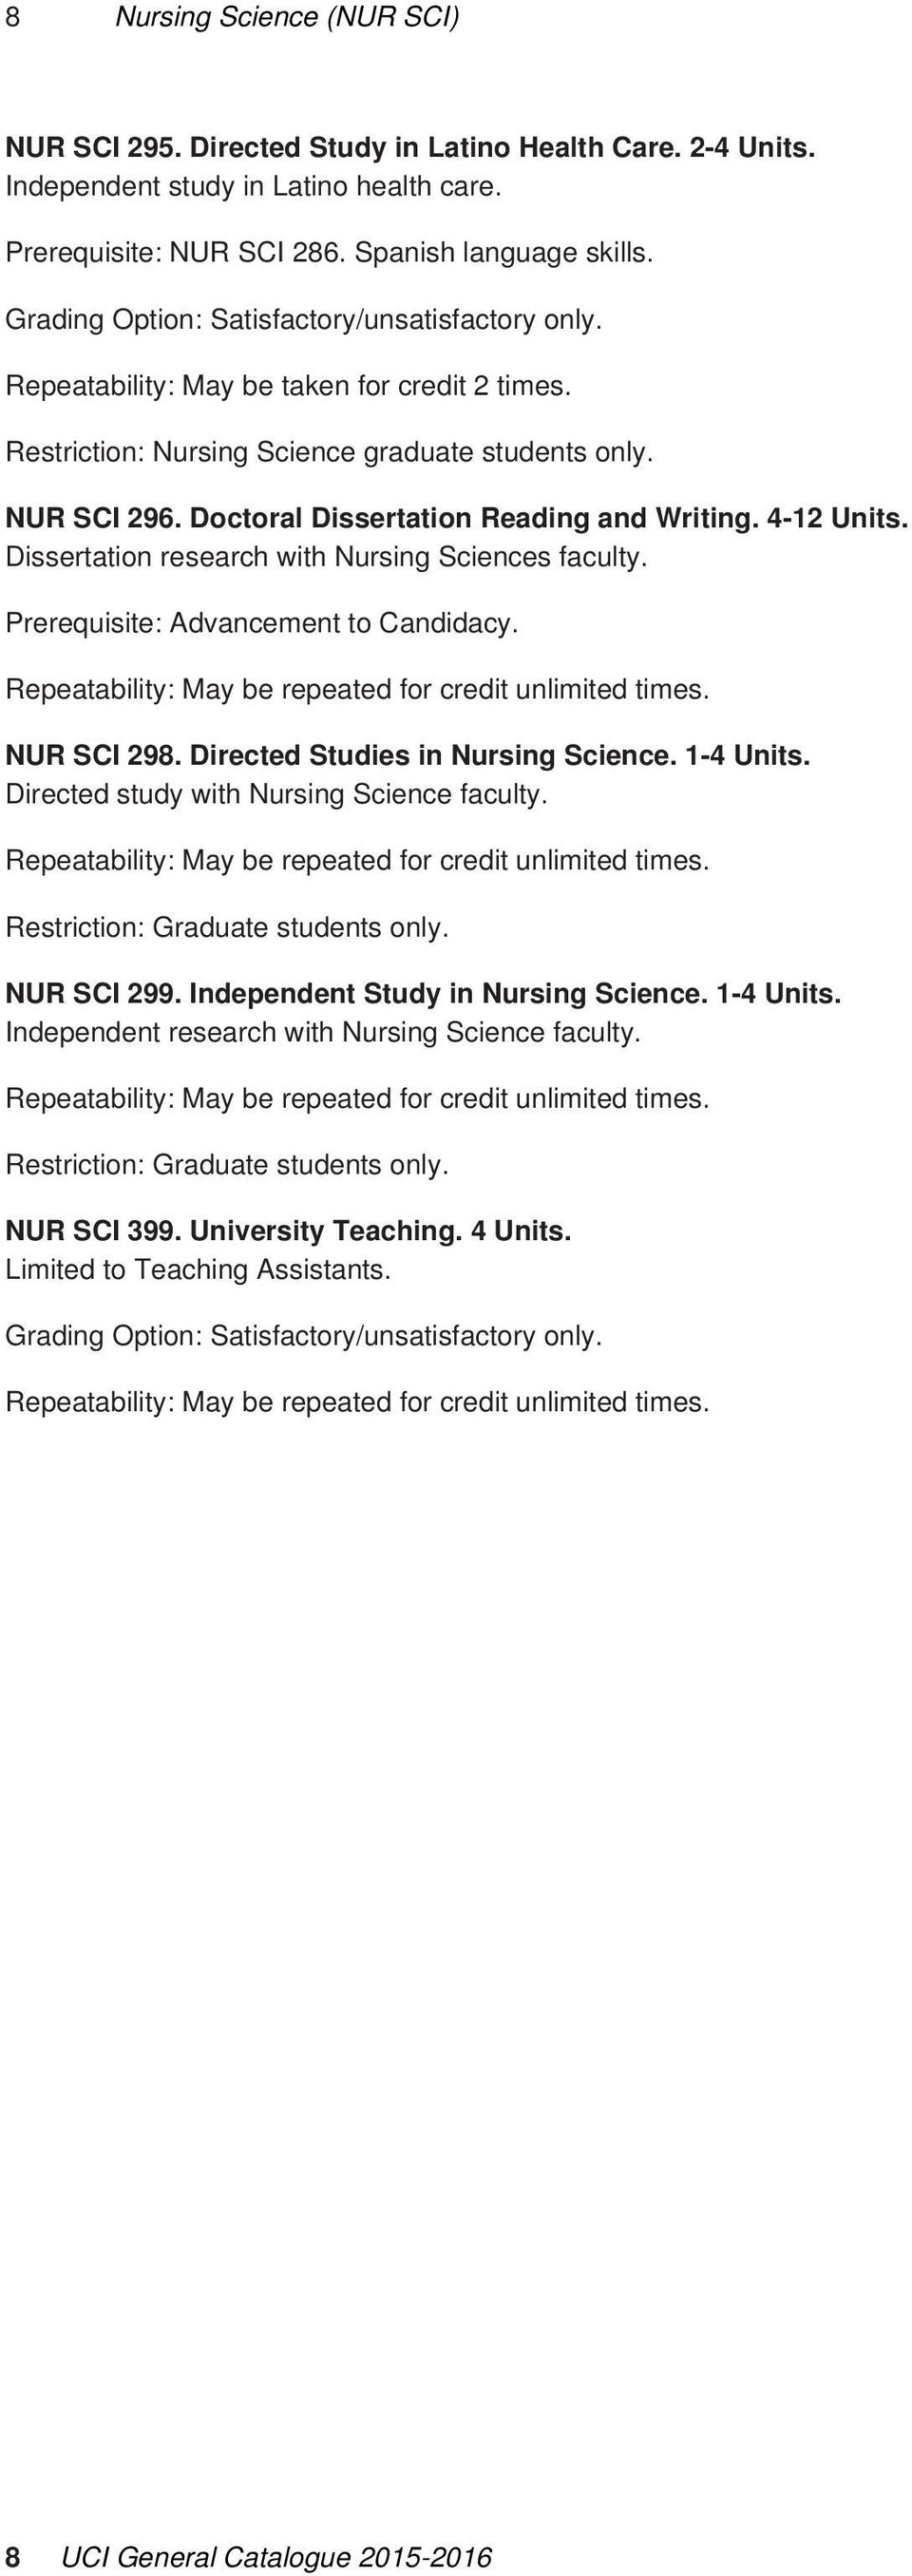 Dissertation research with Nursing Sciences faculty. Prerequisite: Advancement to Candidacy. NUR SCI 298. Directed Studies in Nursing Science. 1-4 Units.